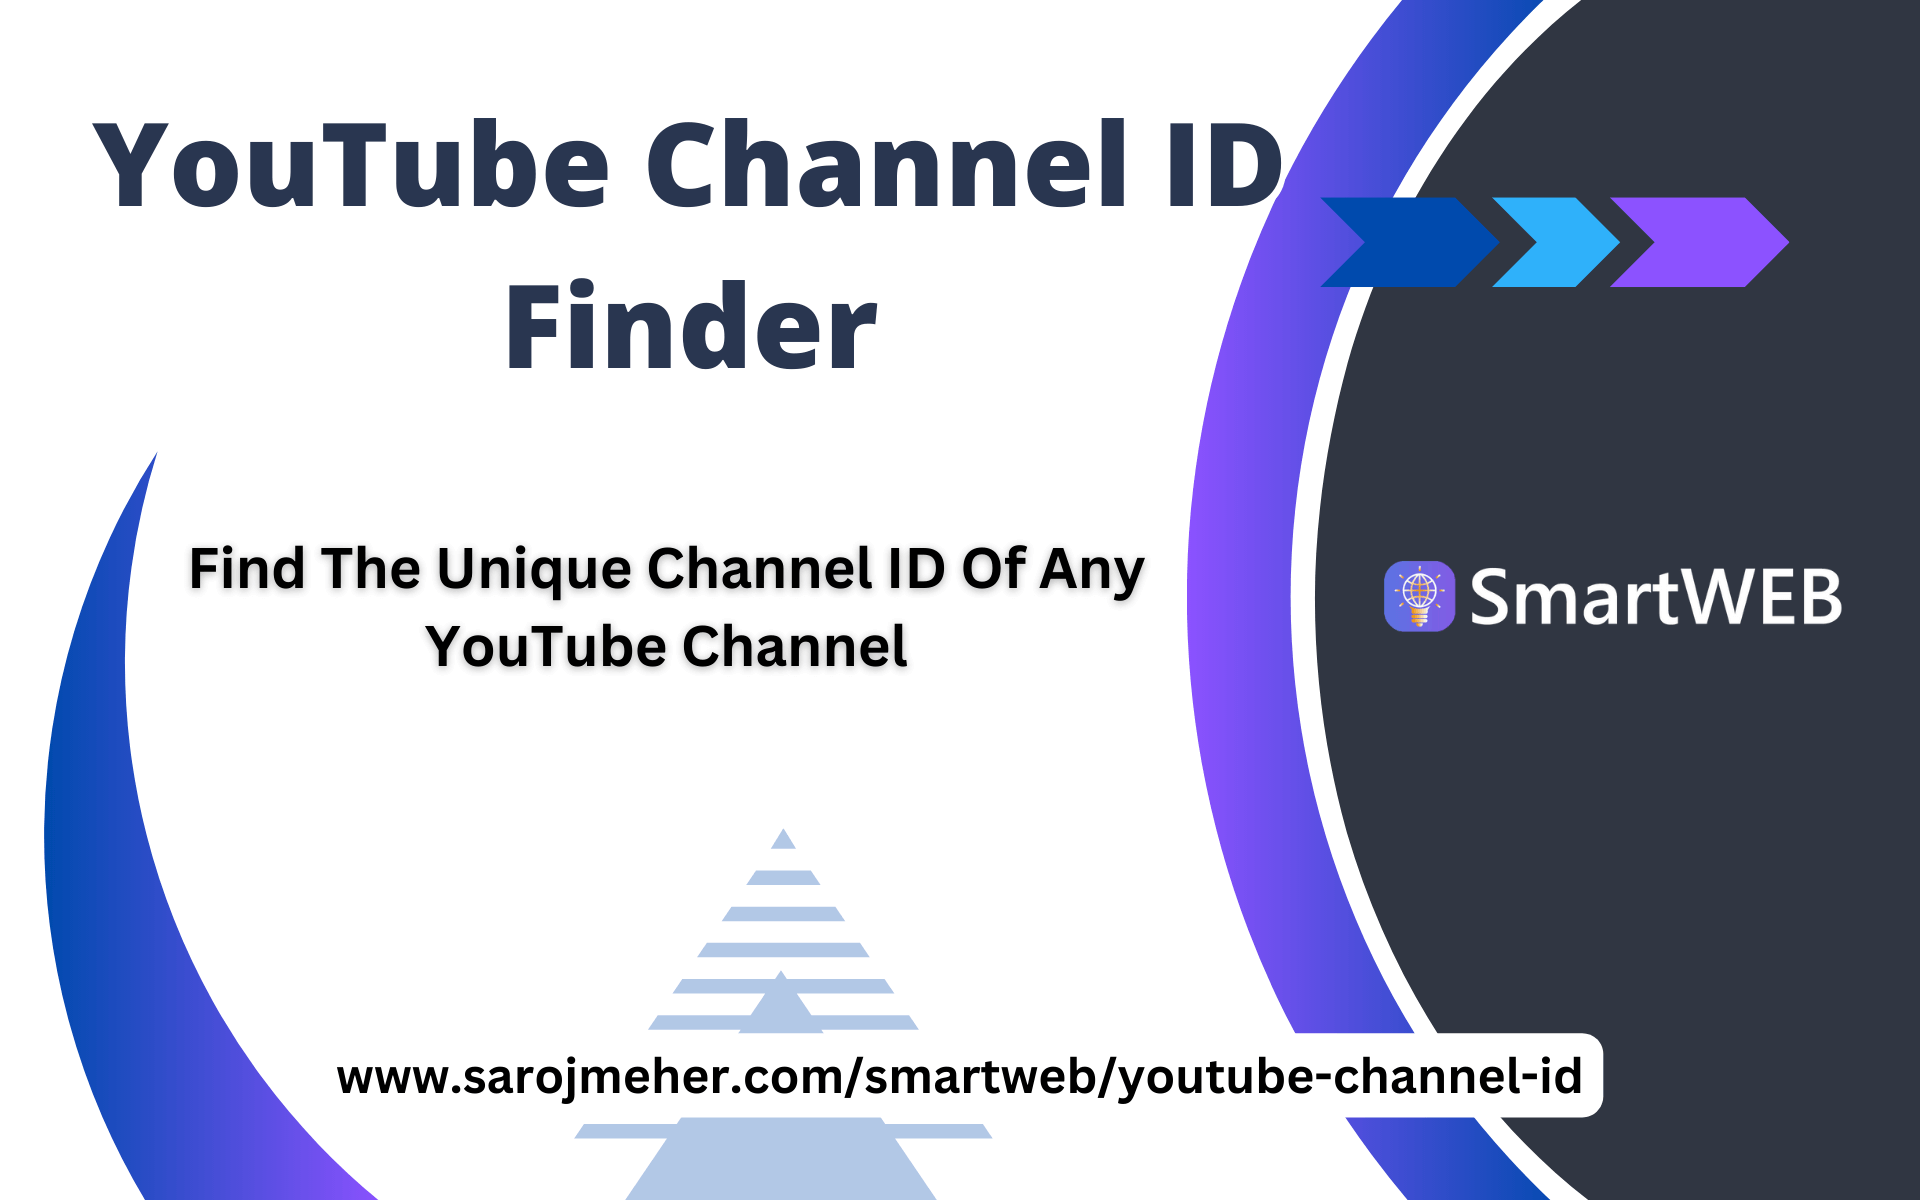 ID canale YouTube Finder